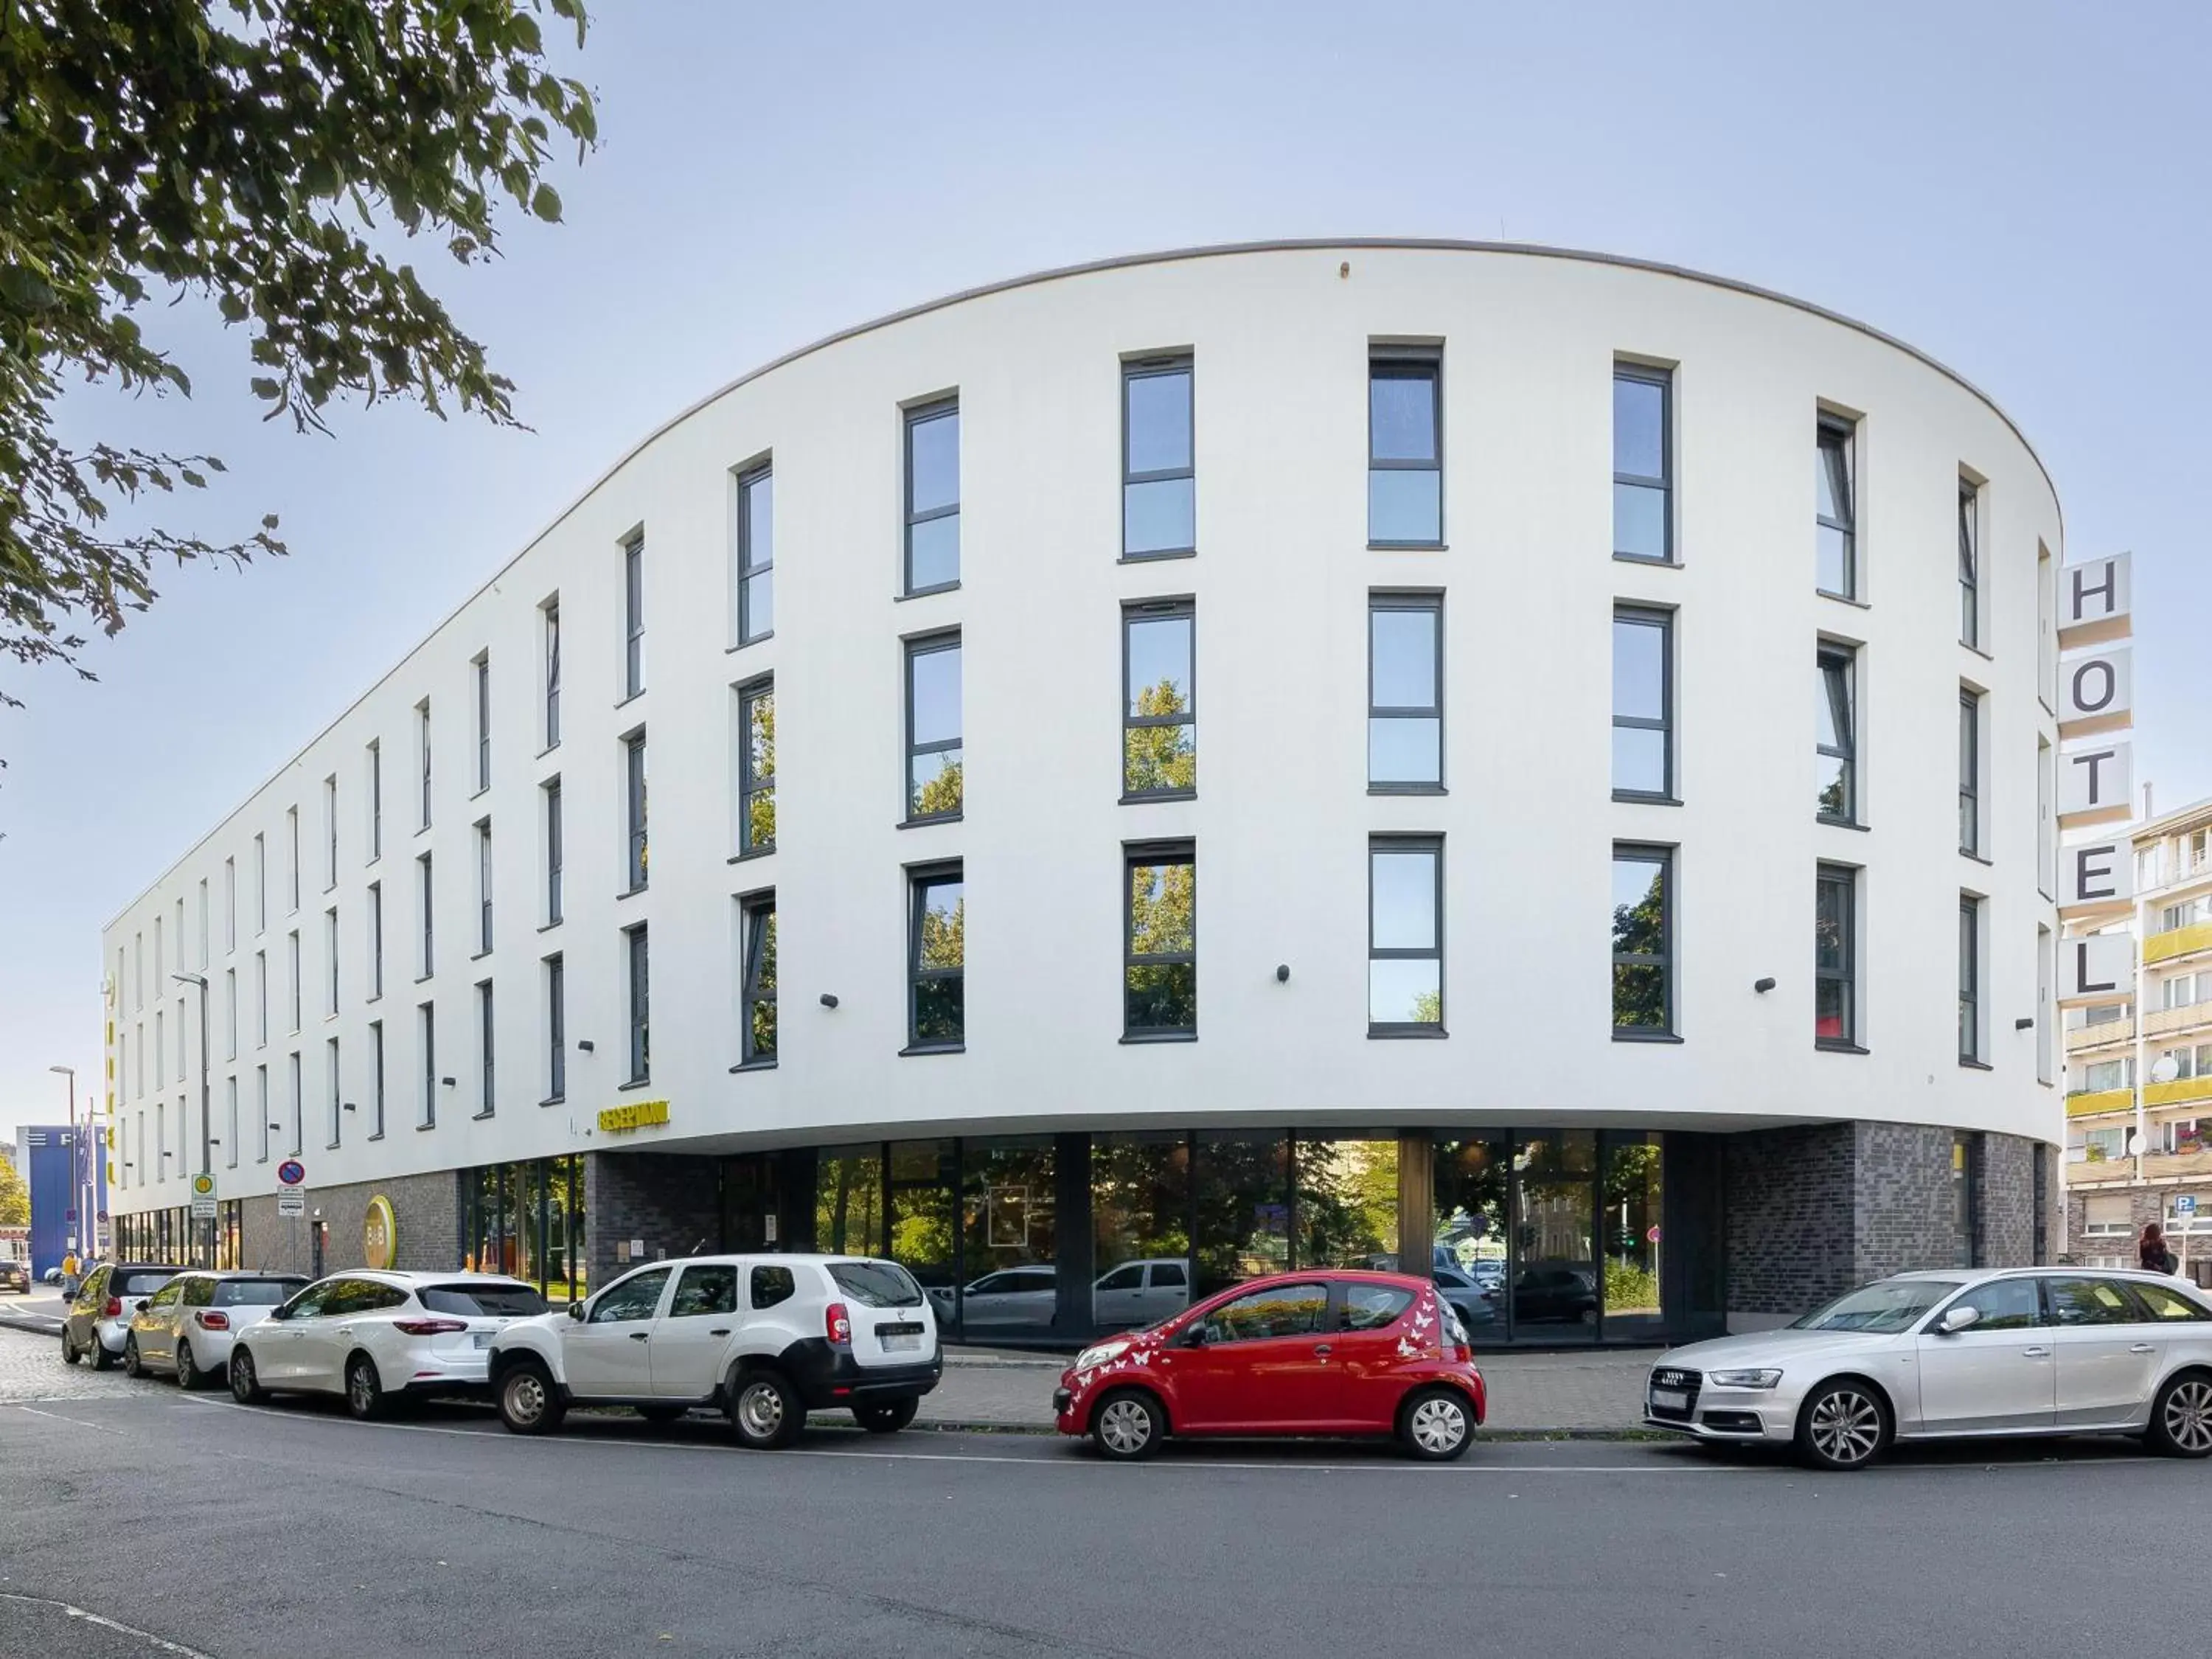 Property Building in B&B Hotel Wuppertal